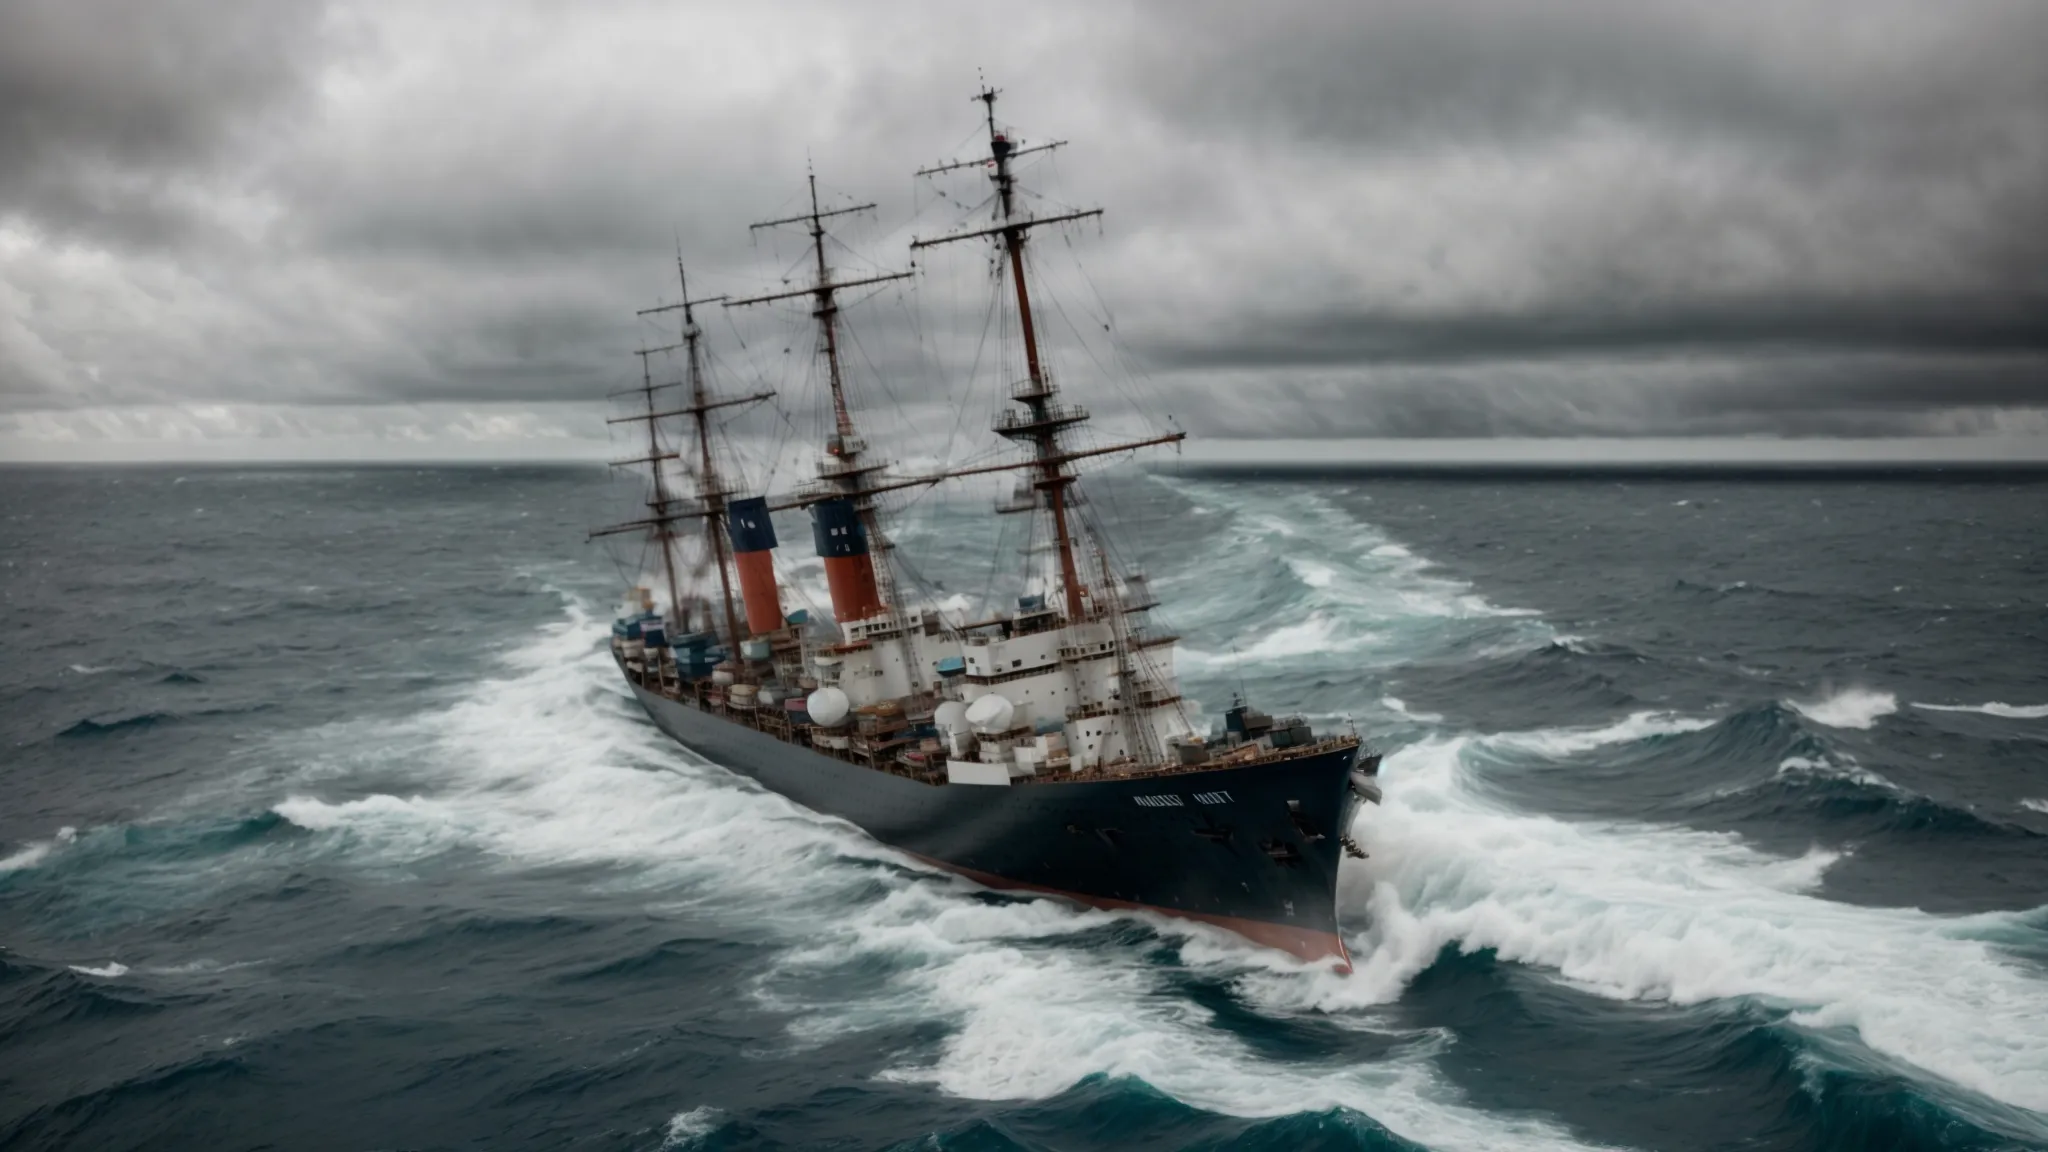 a merchant ship sails through the rough atlantic waters, surrounded by military escorts under a cloudy sky.